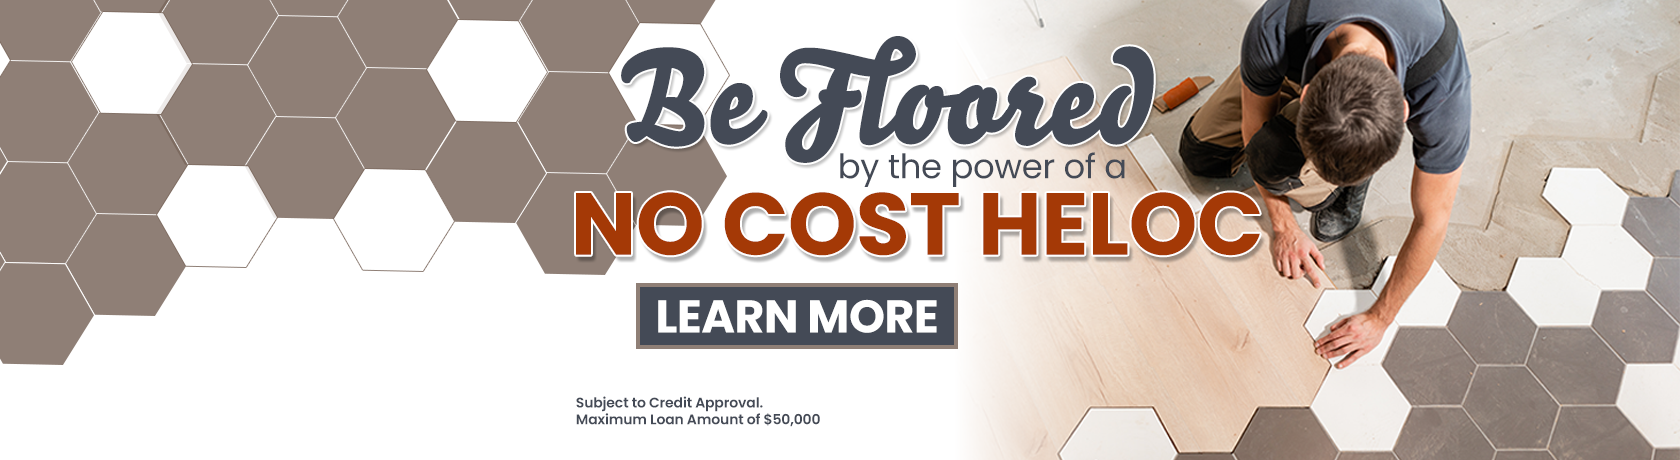 Be floored by the power of a no cost HELOC. Learn More. Subject to credit approval. Maximum loan amount of $50,000. Closing cost must be paid by member if loan is paid in full within one year of loan date.